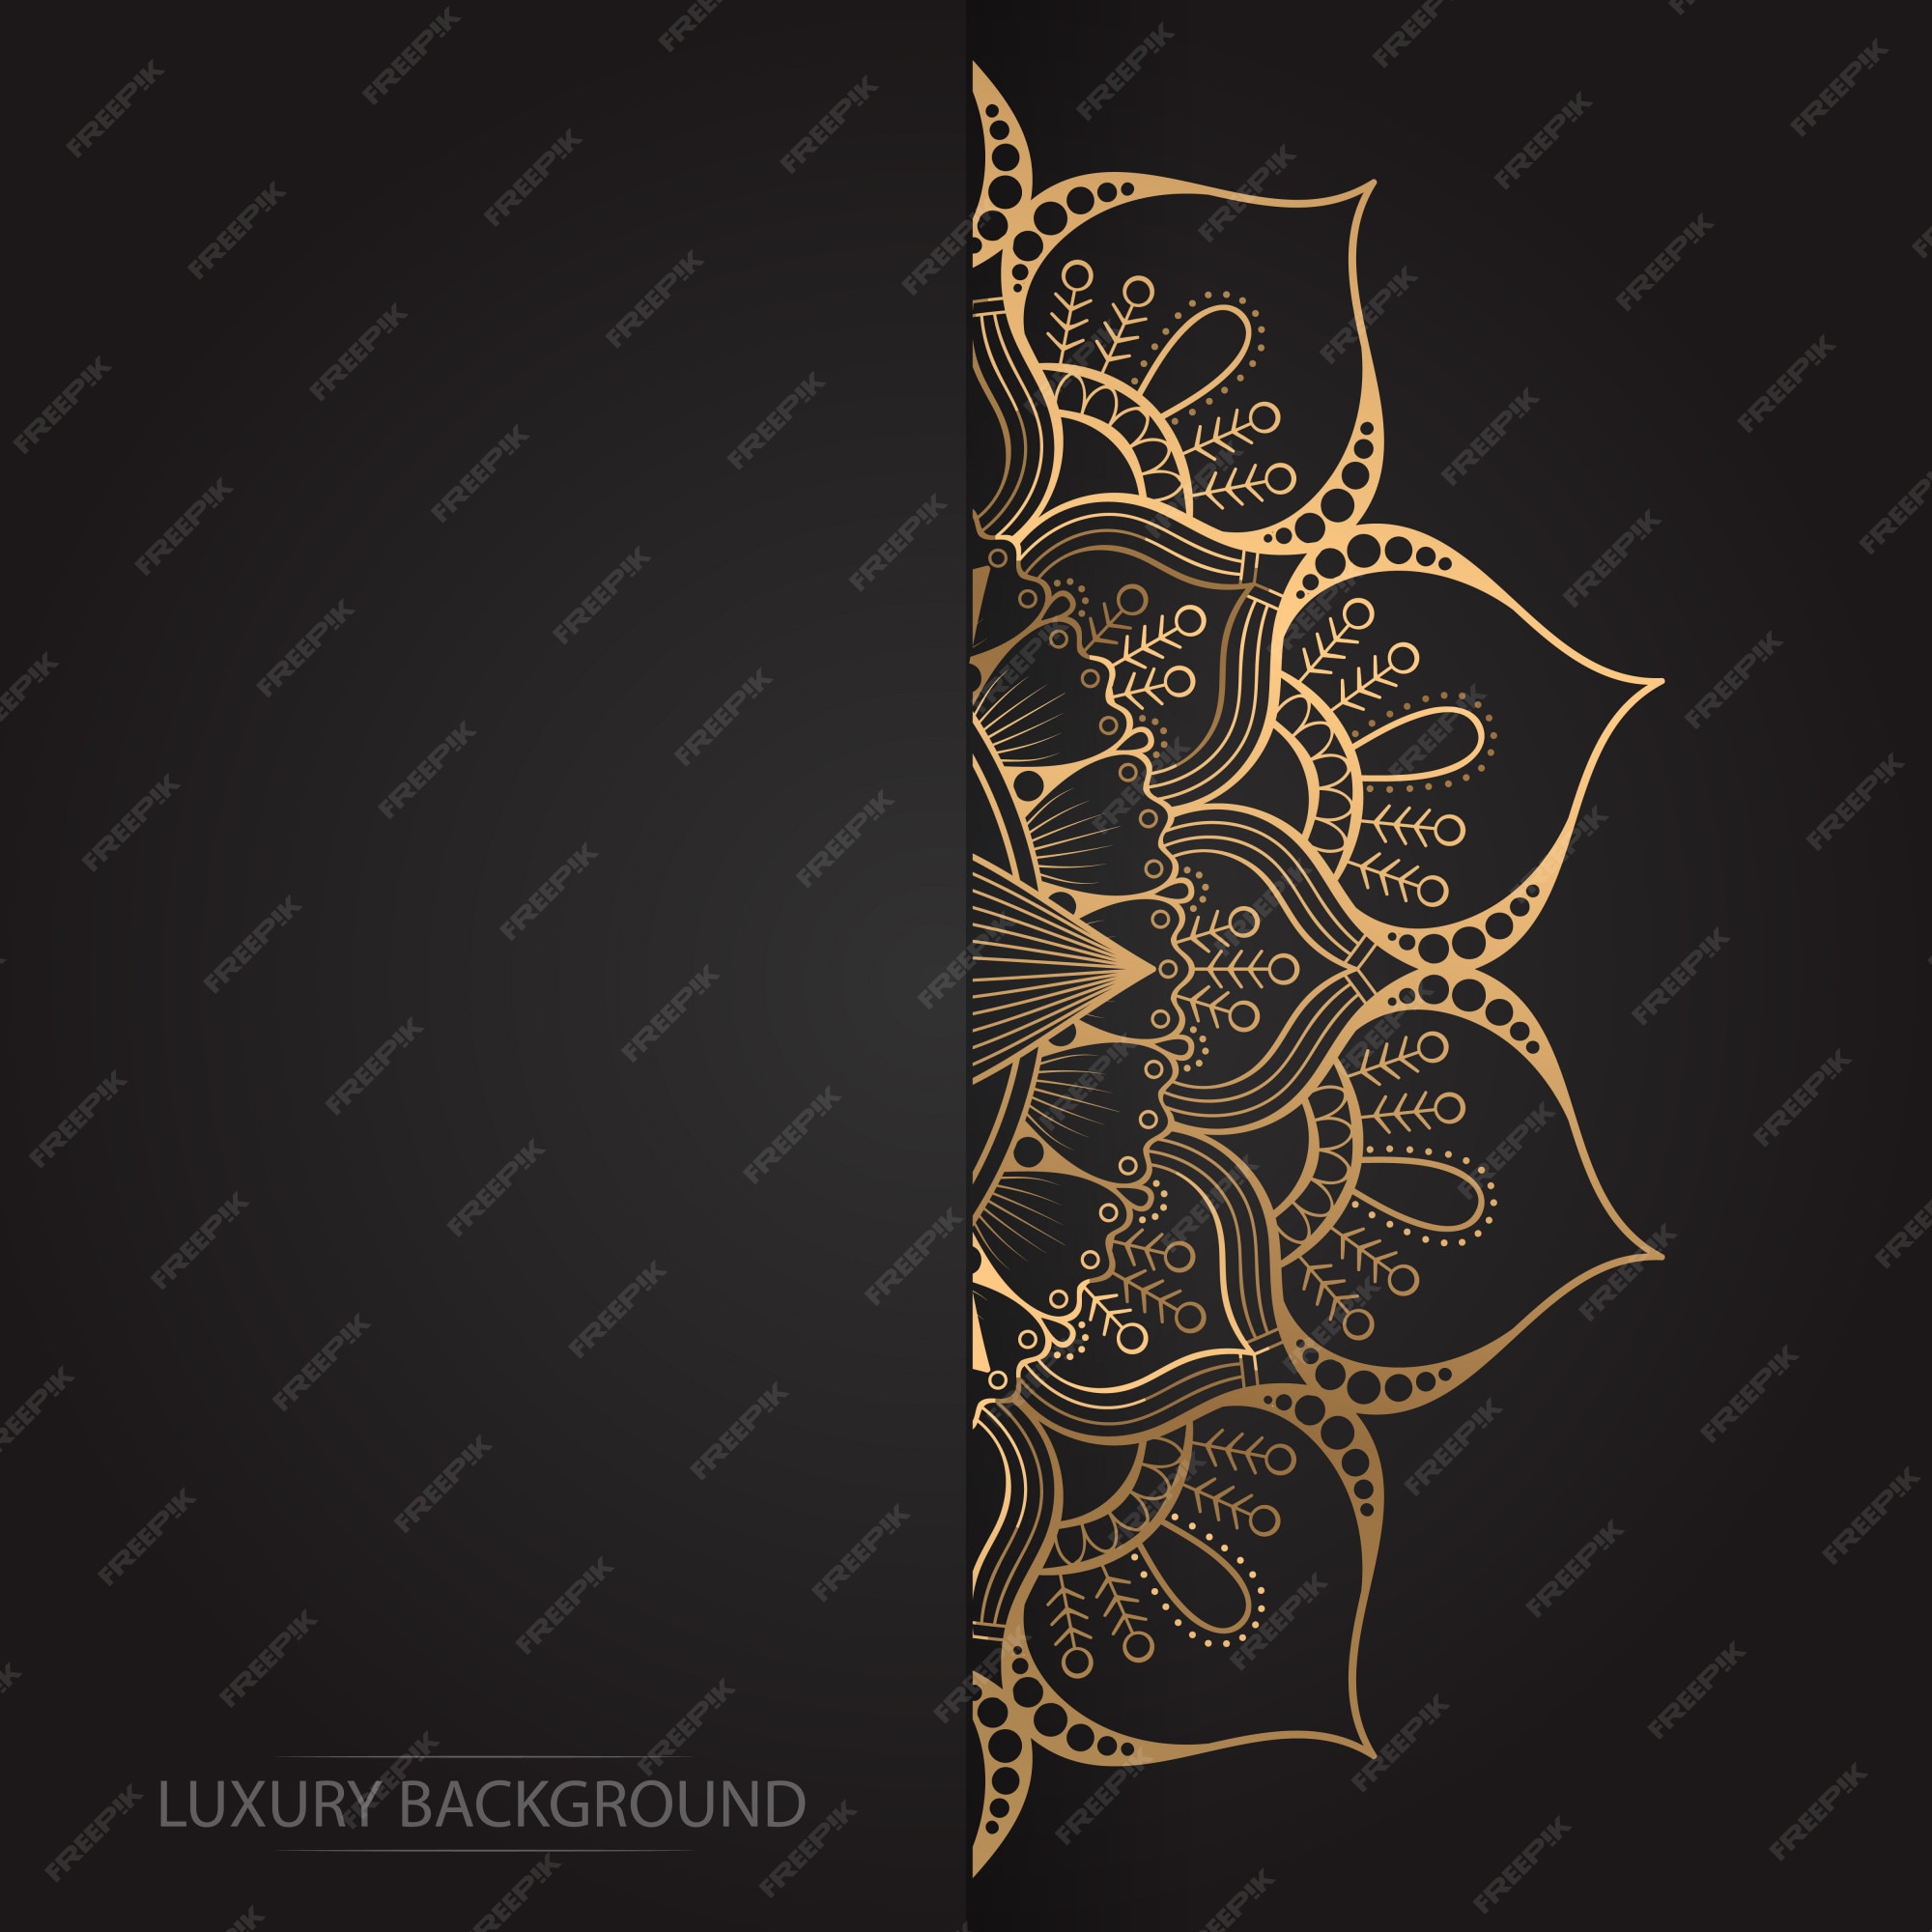 Premium Vector | Gold vintage greeting card on a black background